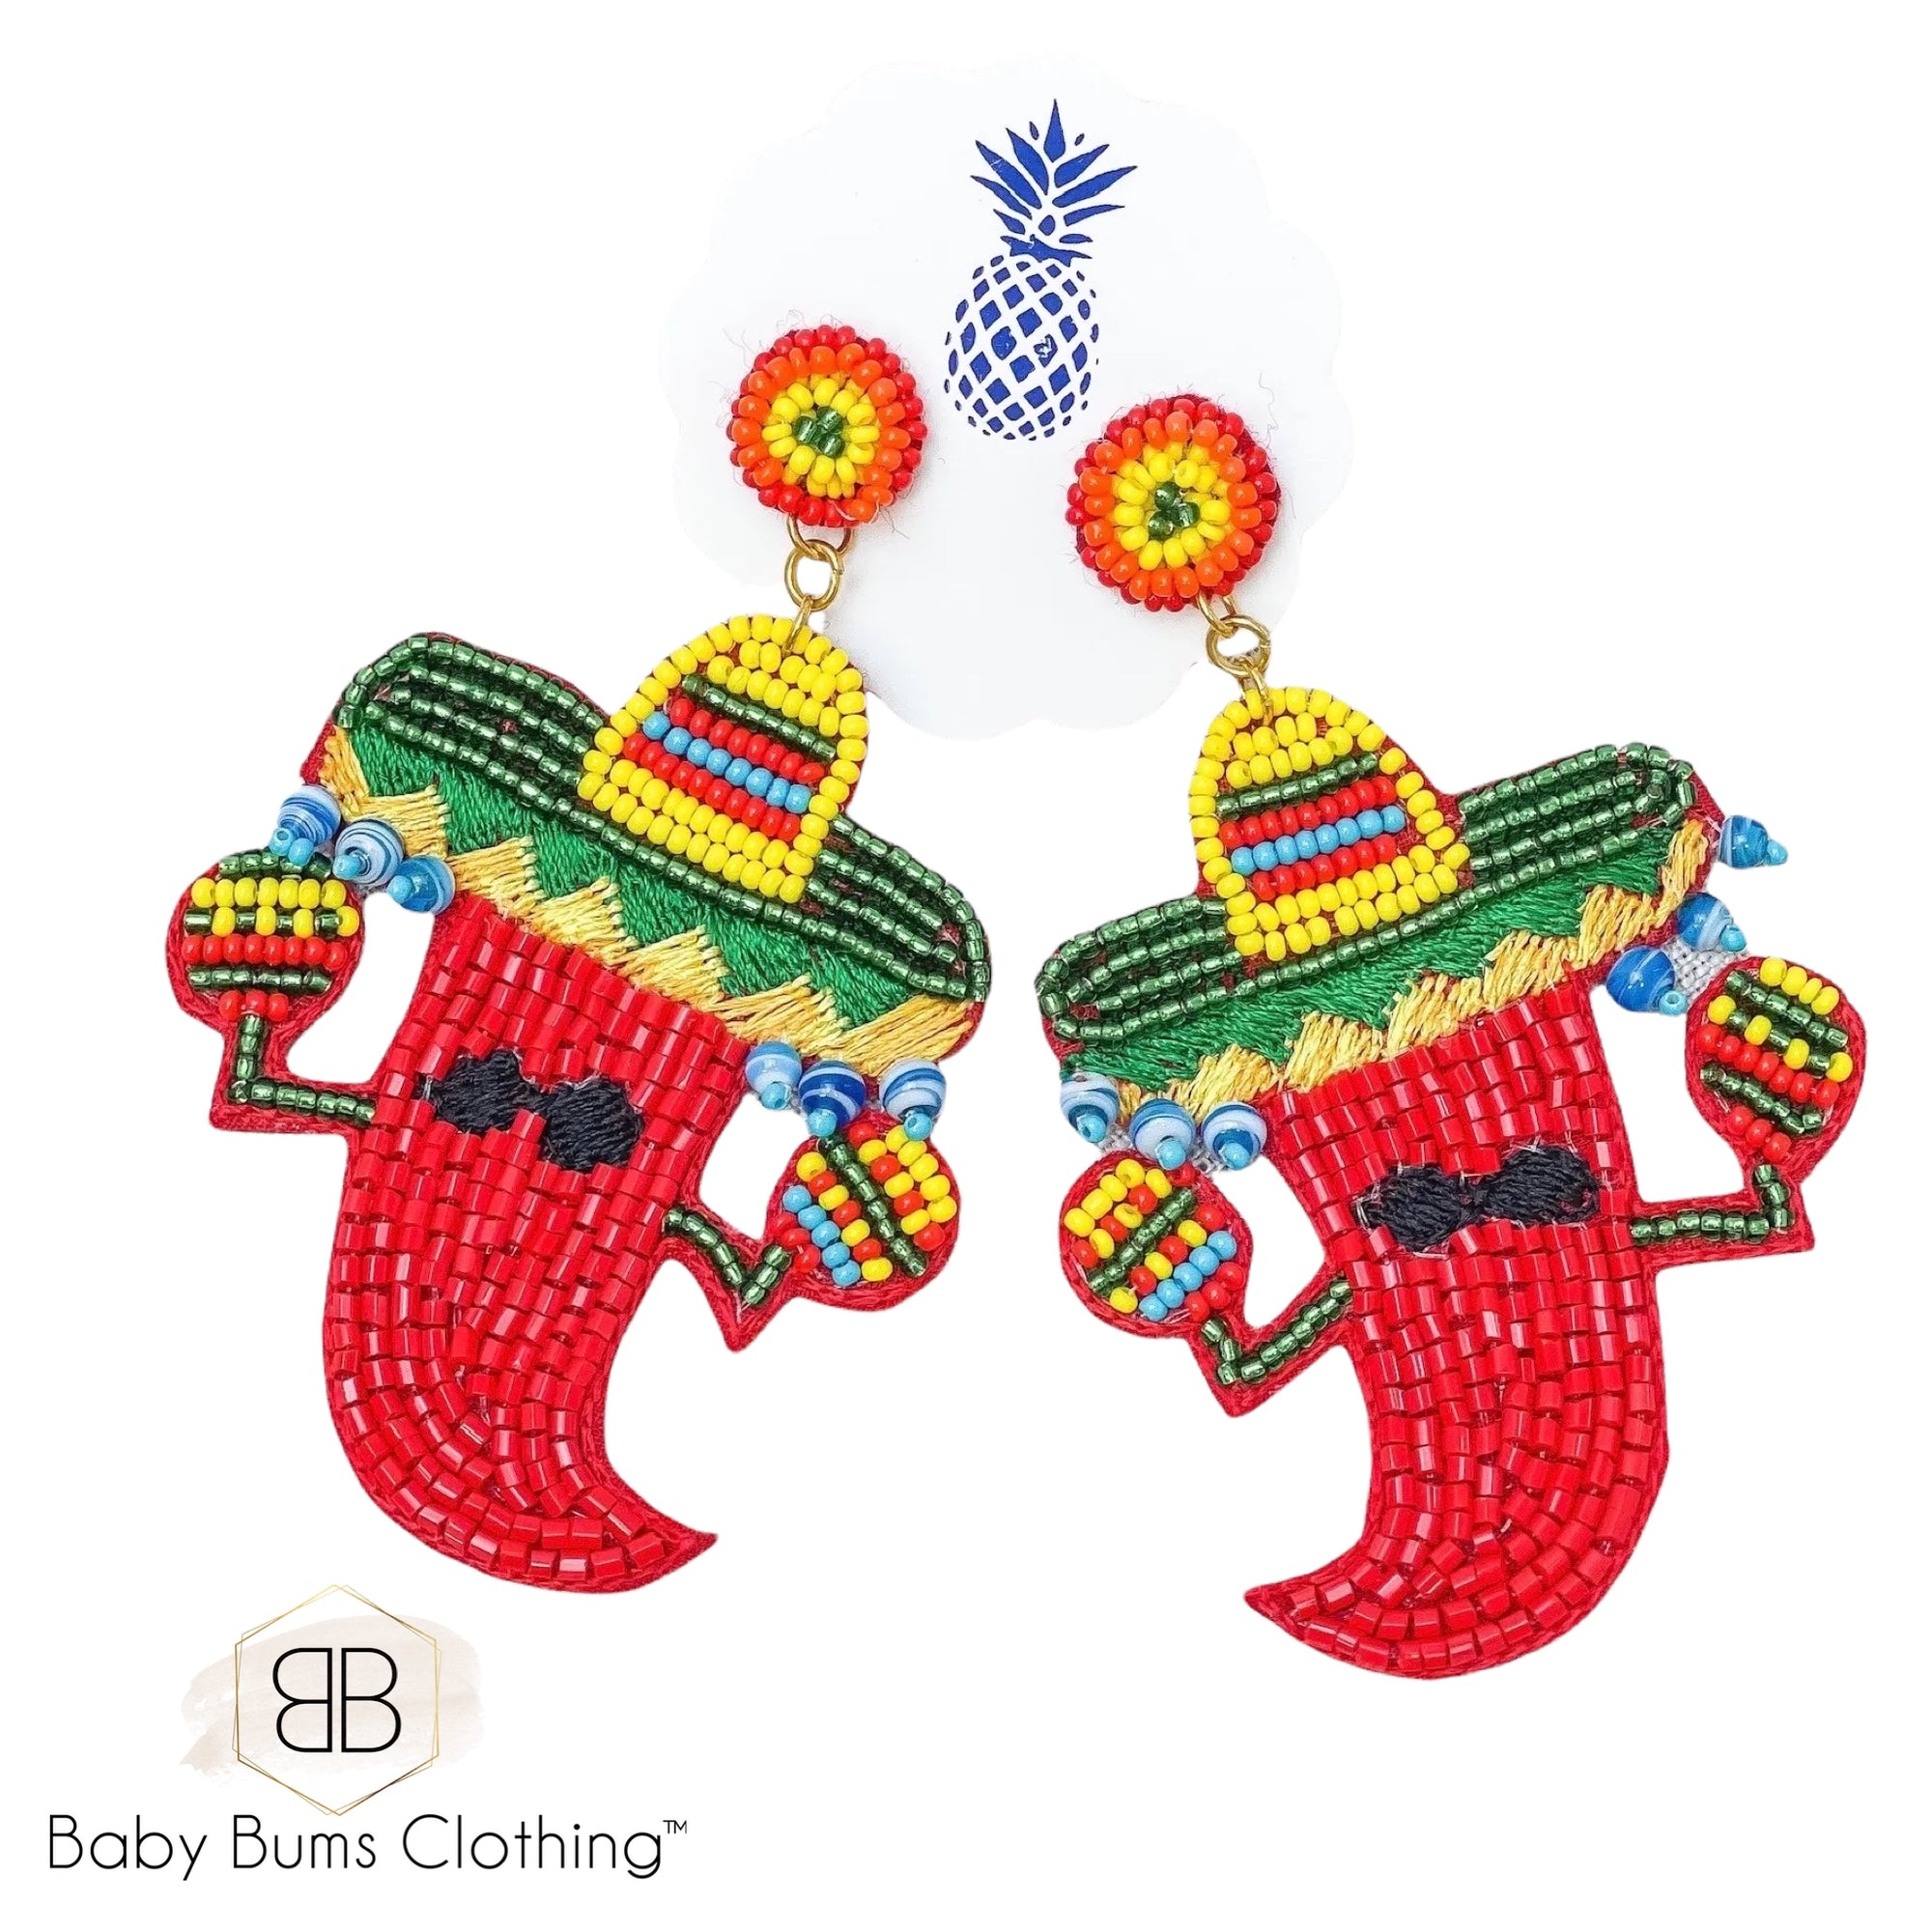 SPICY CHILI EARRINGS - Baby Bums Clothing 